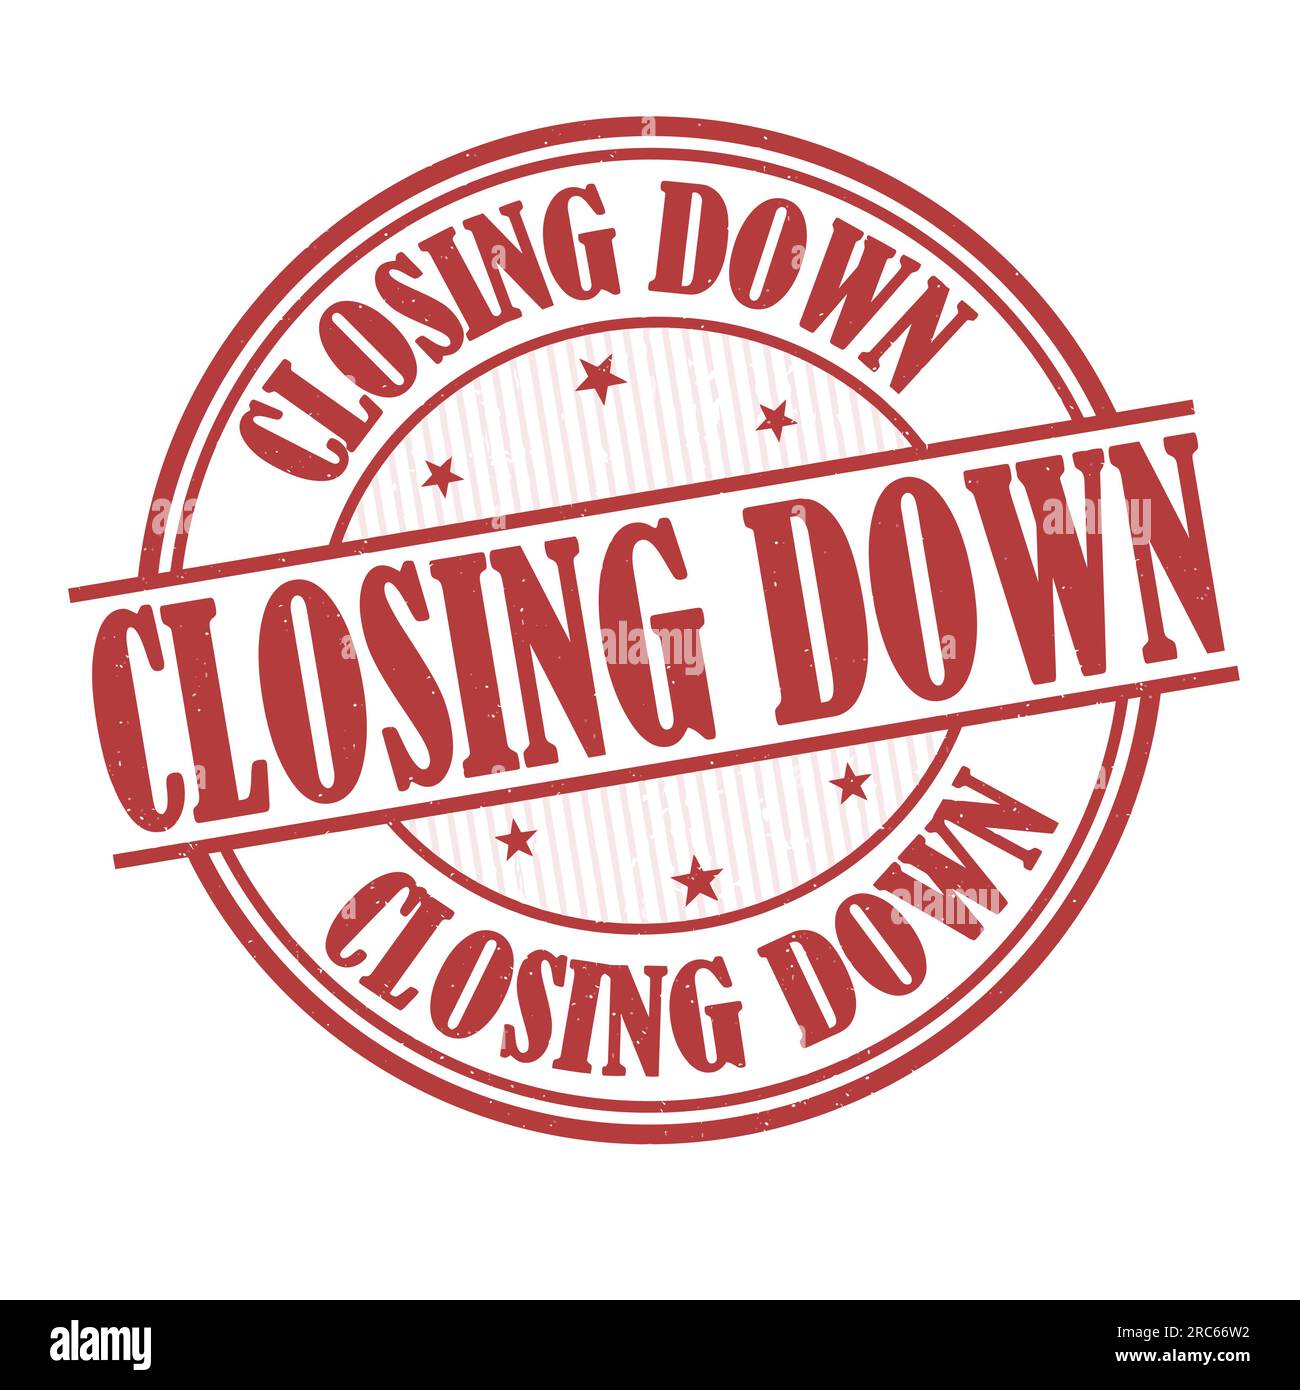 Closing down grunge rubber stamp on white background, vector illustration Stock Vector